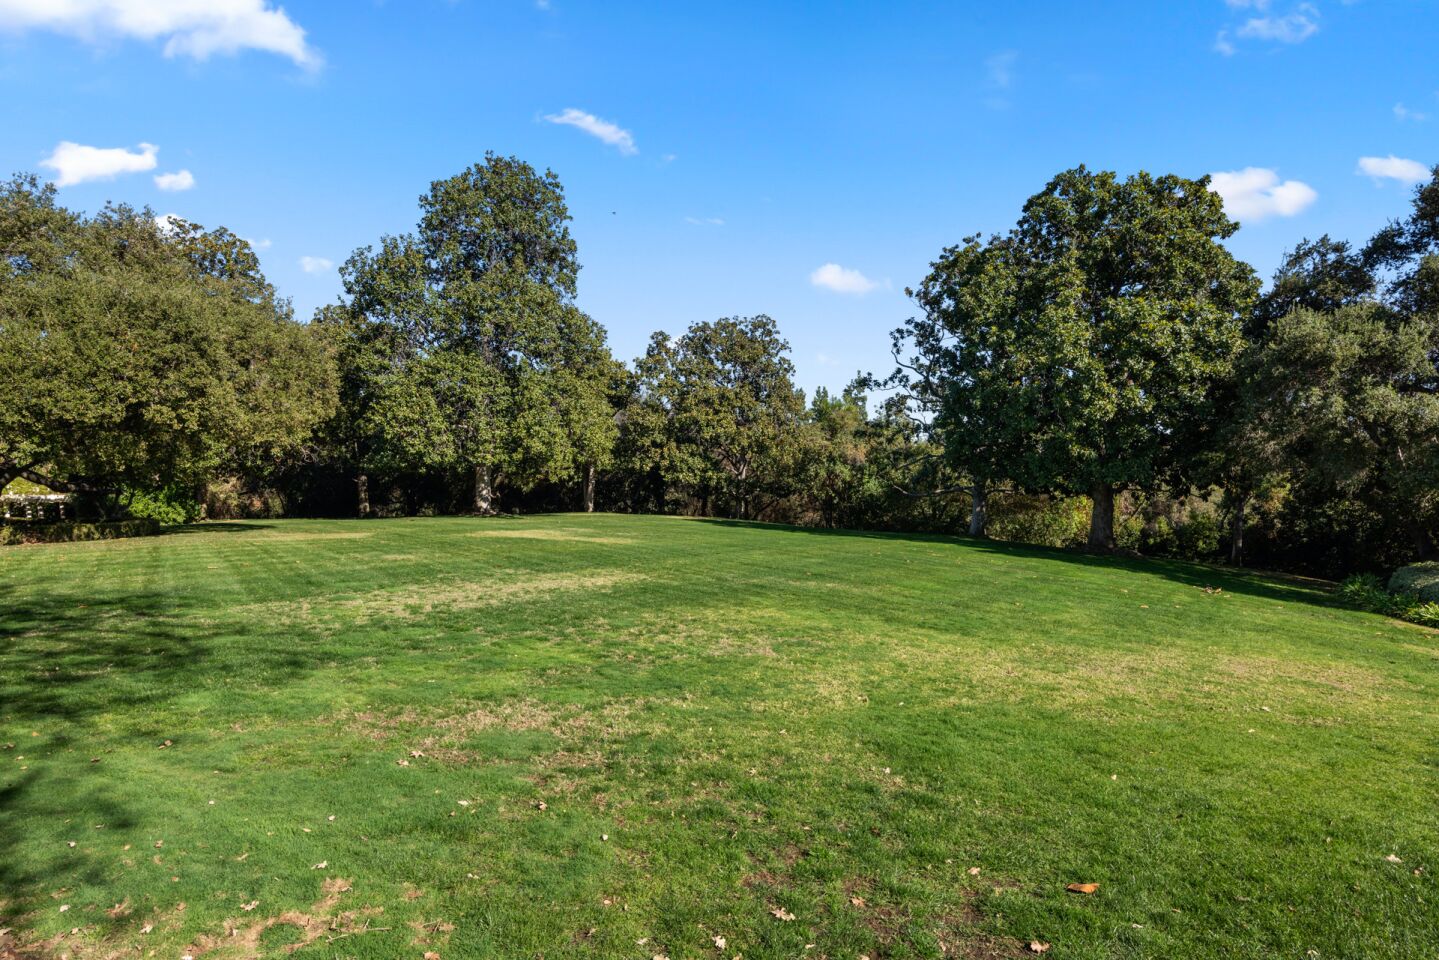 Wide view of the lawn with trees behind it